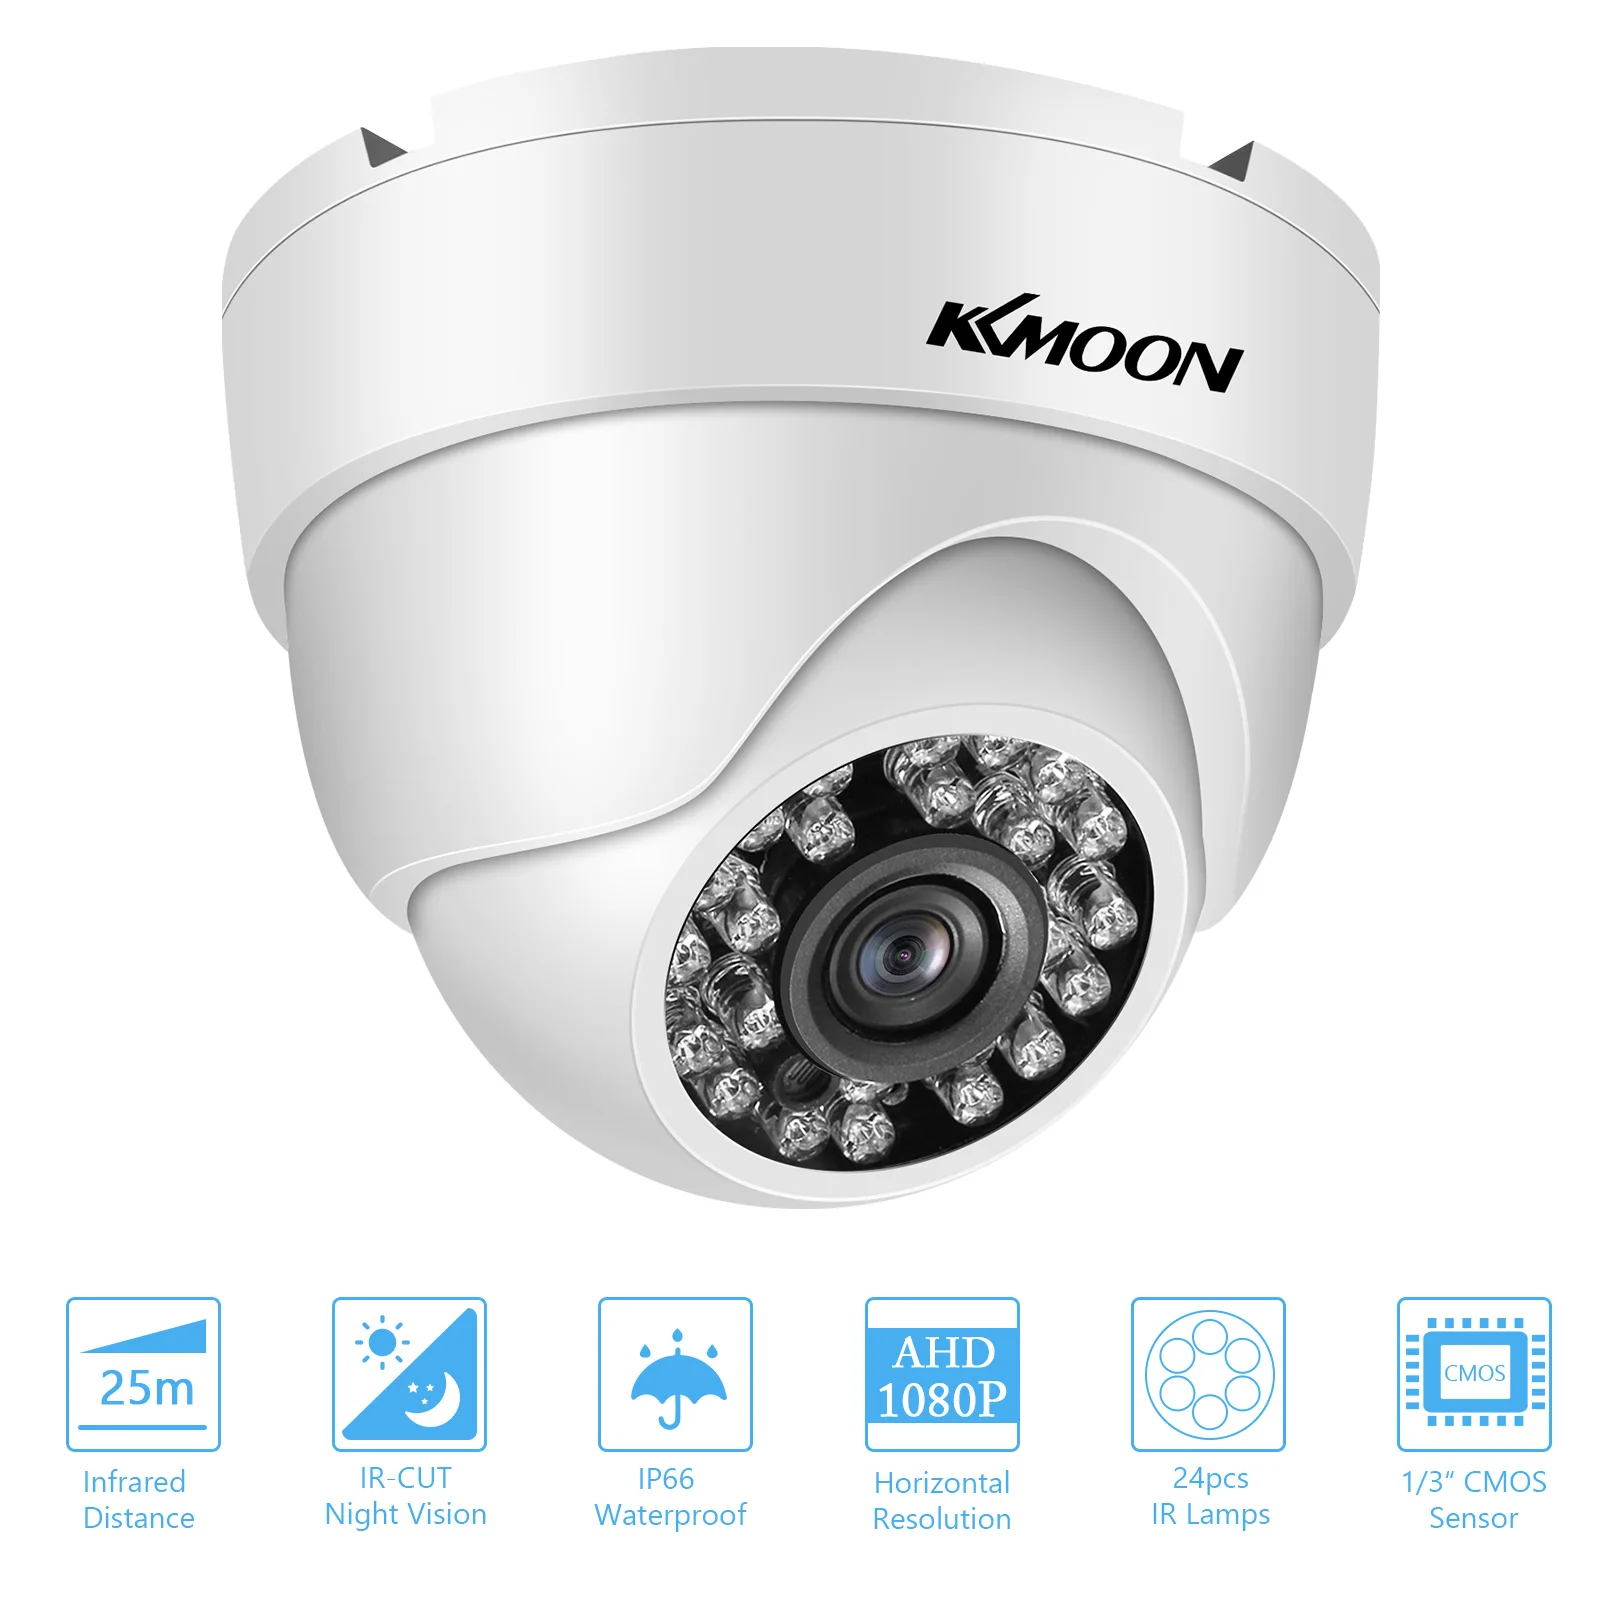 

720P Analog Security Camera Surveillance CCTV Camera Outdoor Weatherproof,Infrared Night Vision,Motion Detection for Analog DVR